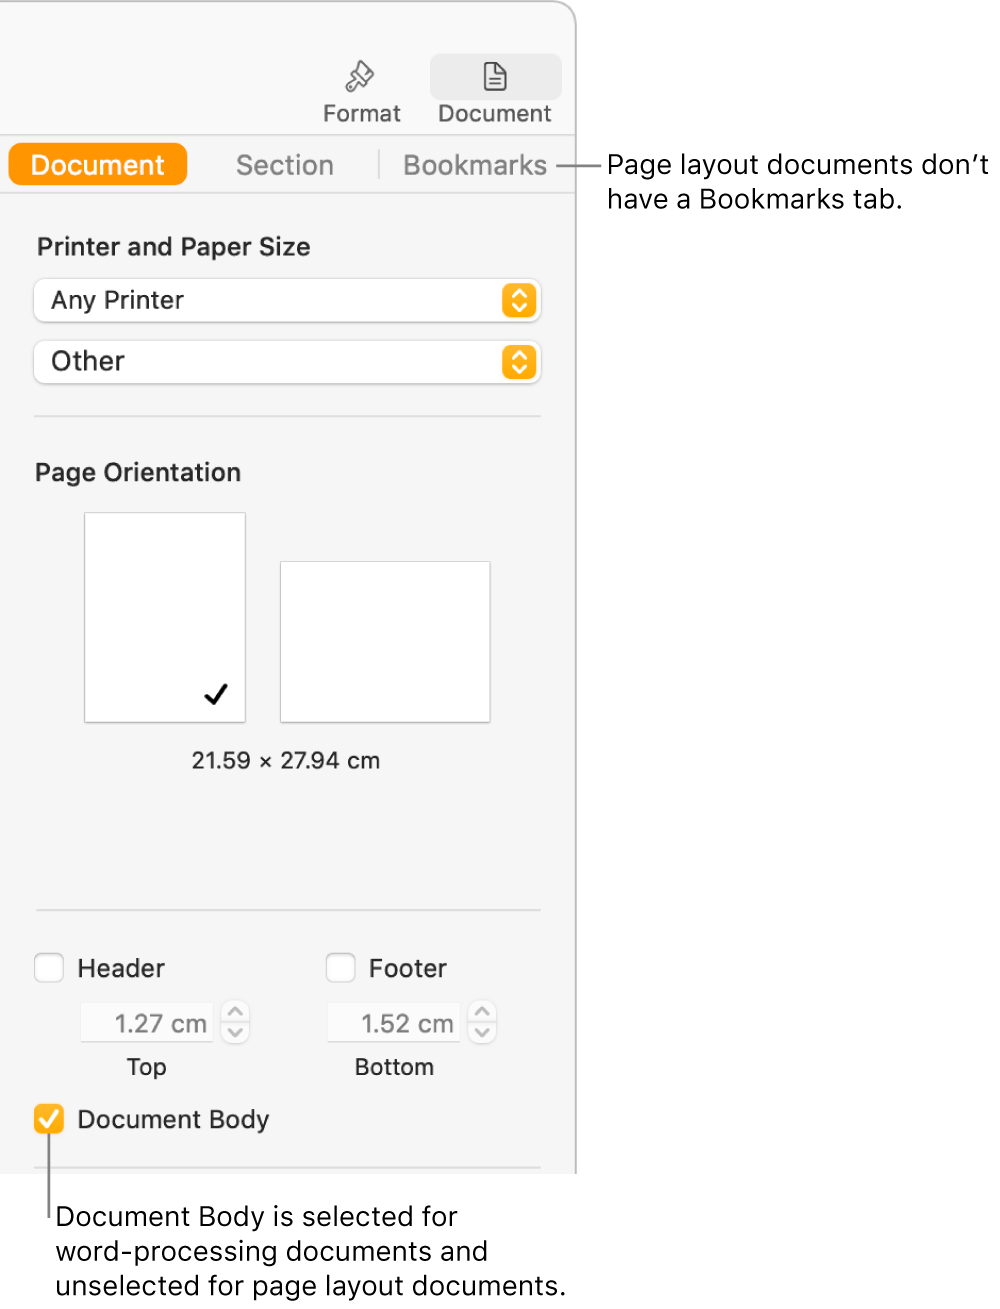 The Format sidebar with Document, Section and Bookmarks tabs at the top. The Document tab is selected and a callout to the Bookmarks tab says that page layout documents don’t have a Bookmarks tab. The Document Body tick box is selected, which also indicates that this is a word-processing document.